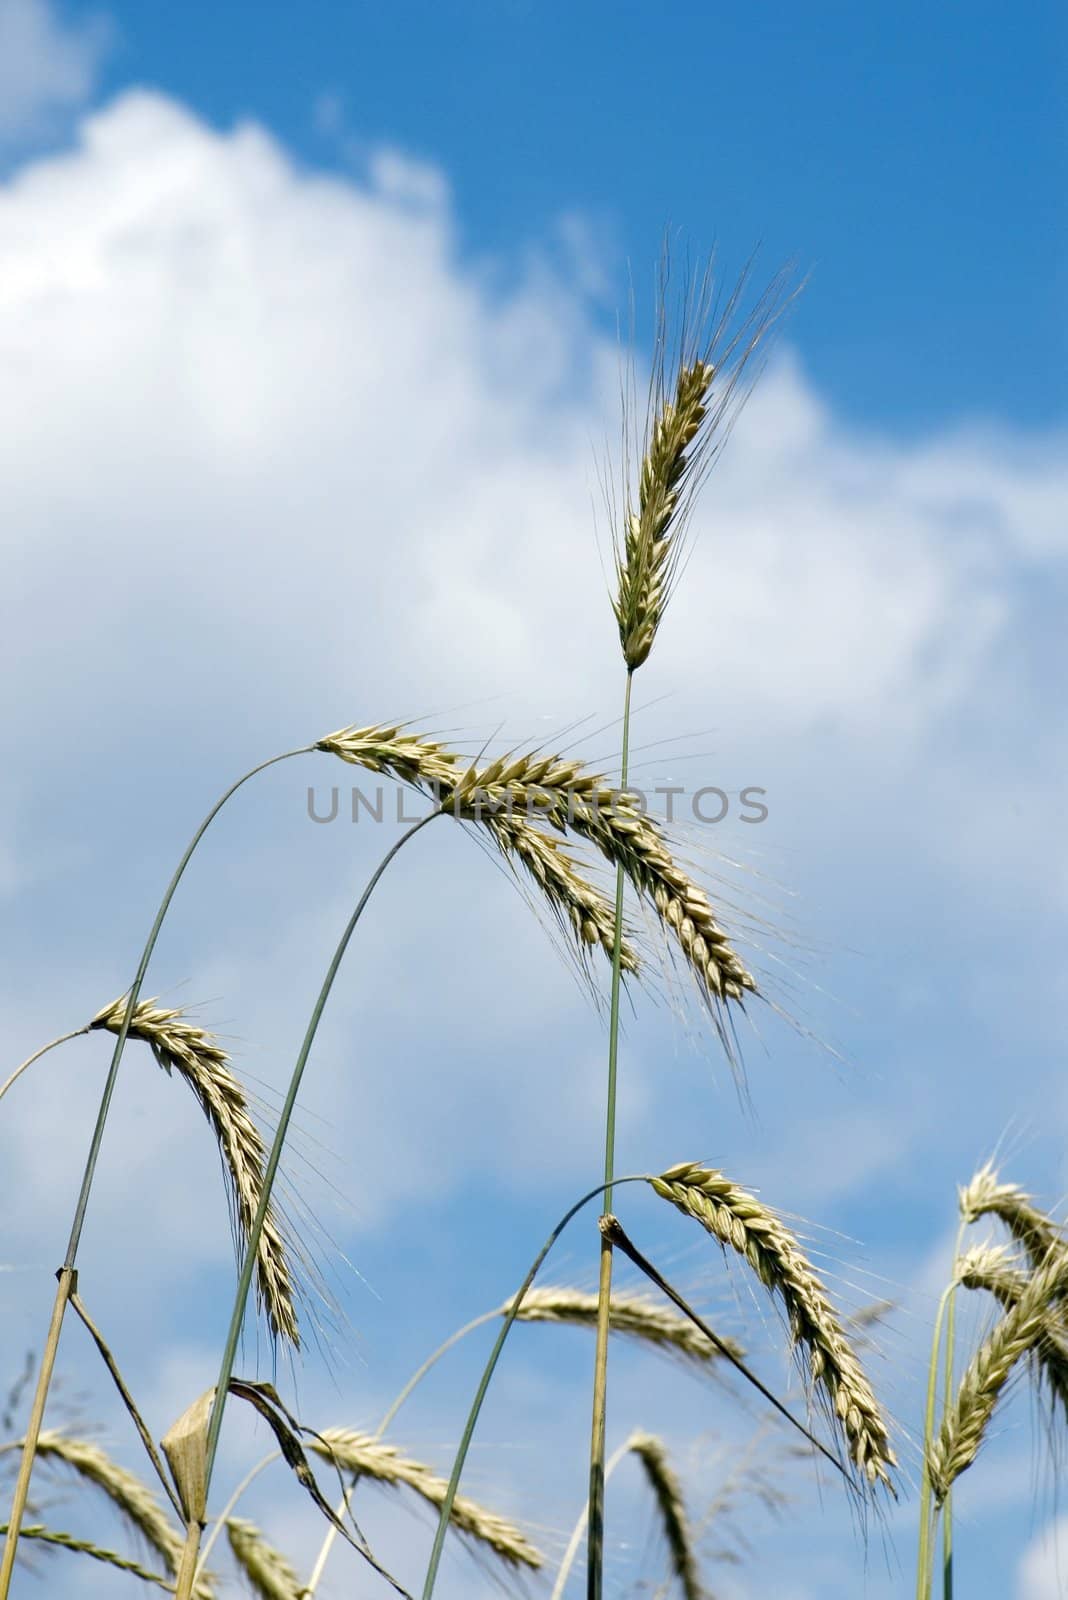 Yellow wheat ears against blue sky with clouds

